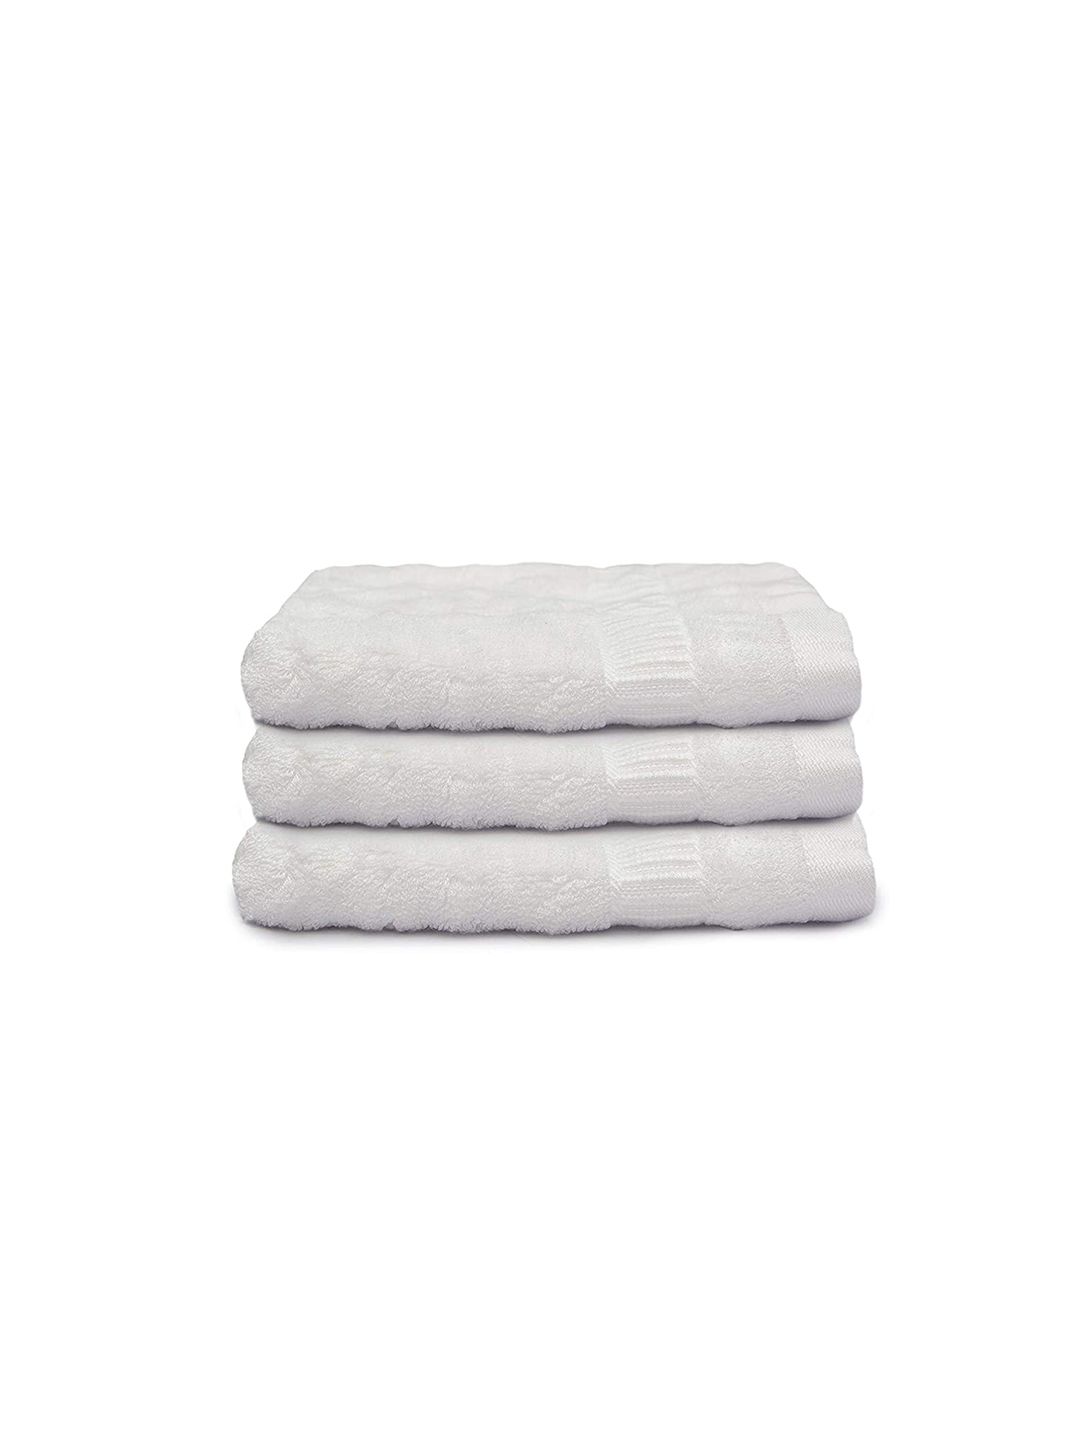 MUSH Set of 3 White Bamboo 600 GSM Ultra Soft & Eco Friendly Face Towels Price in India